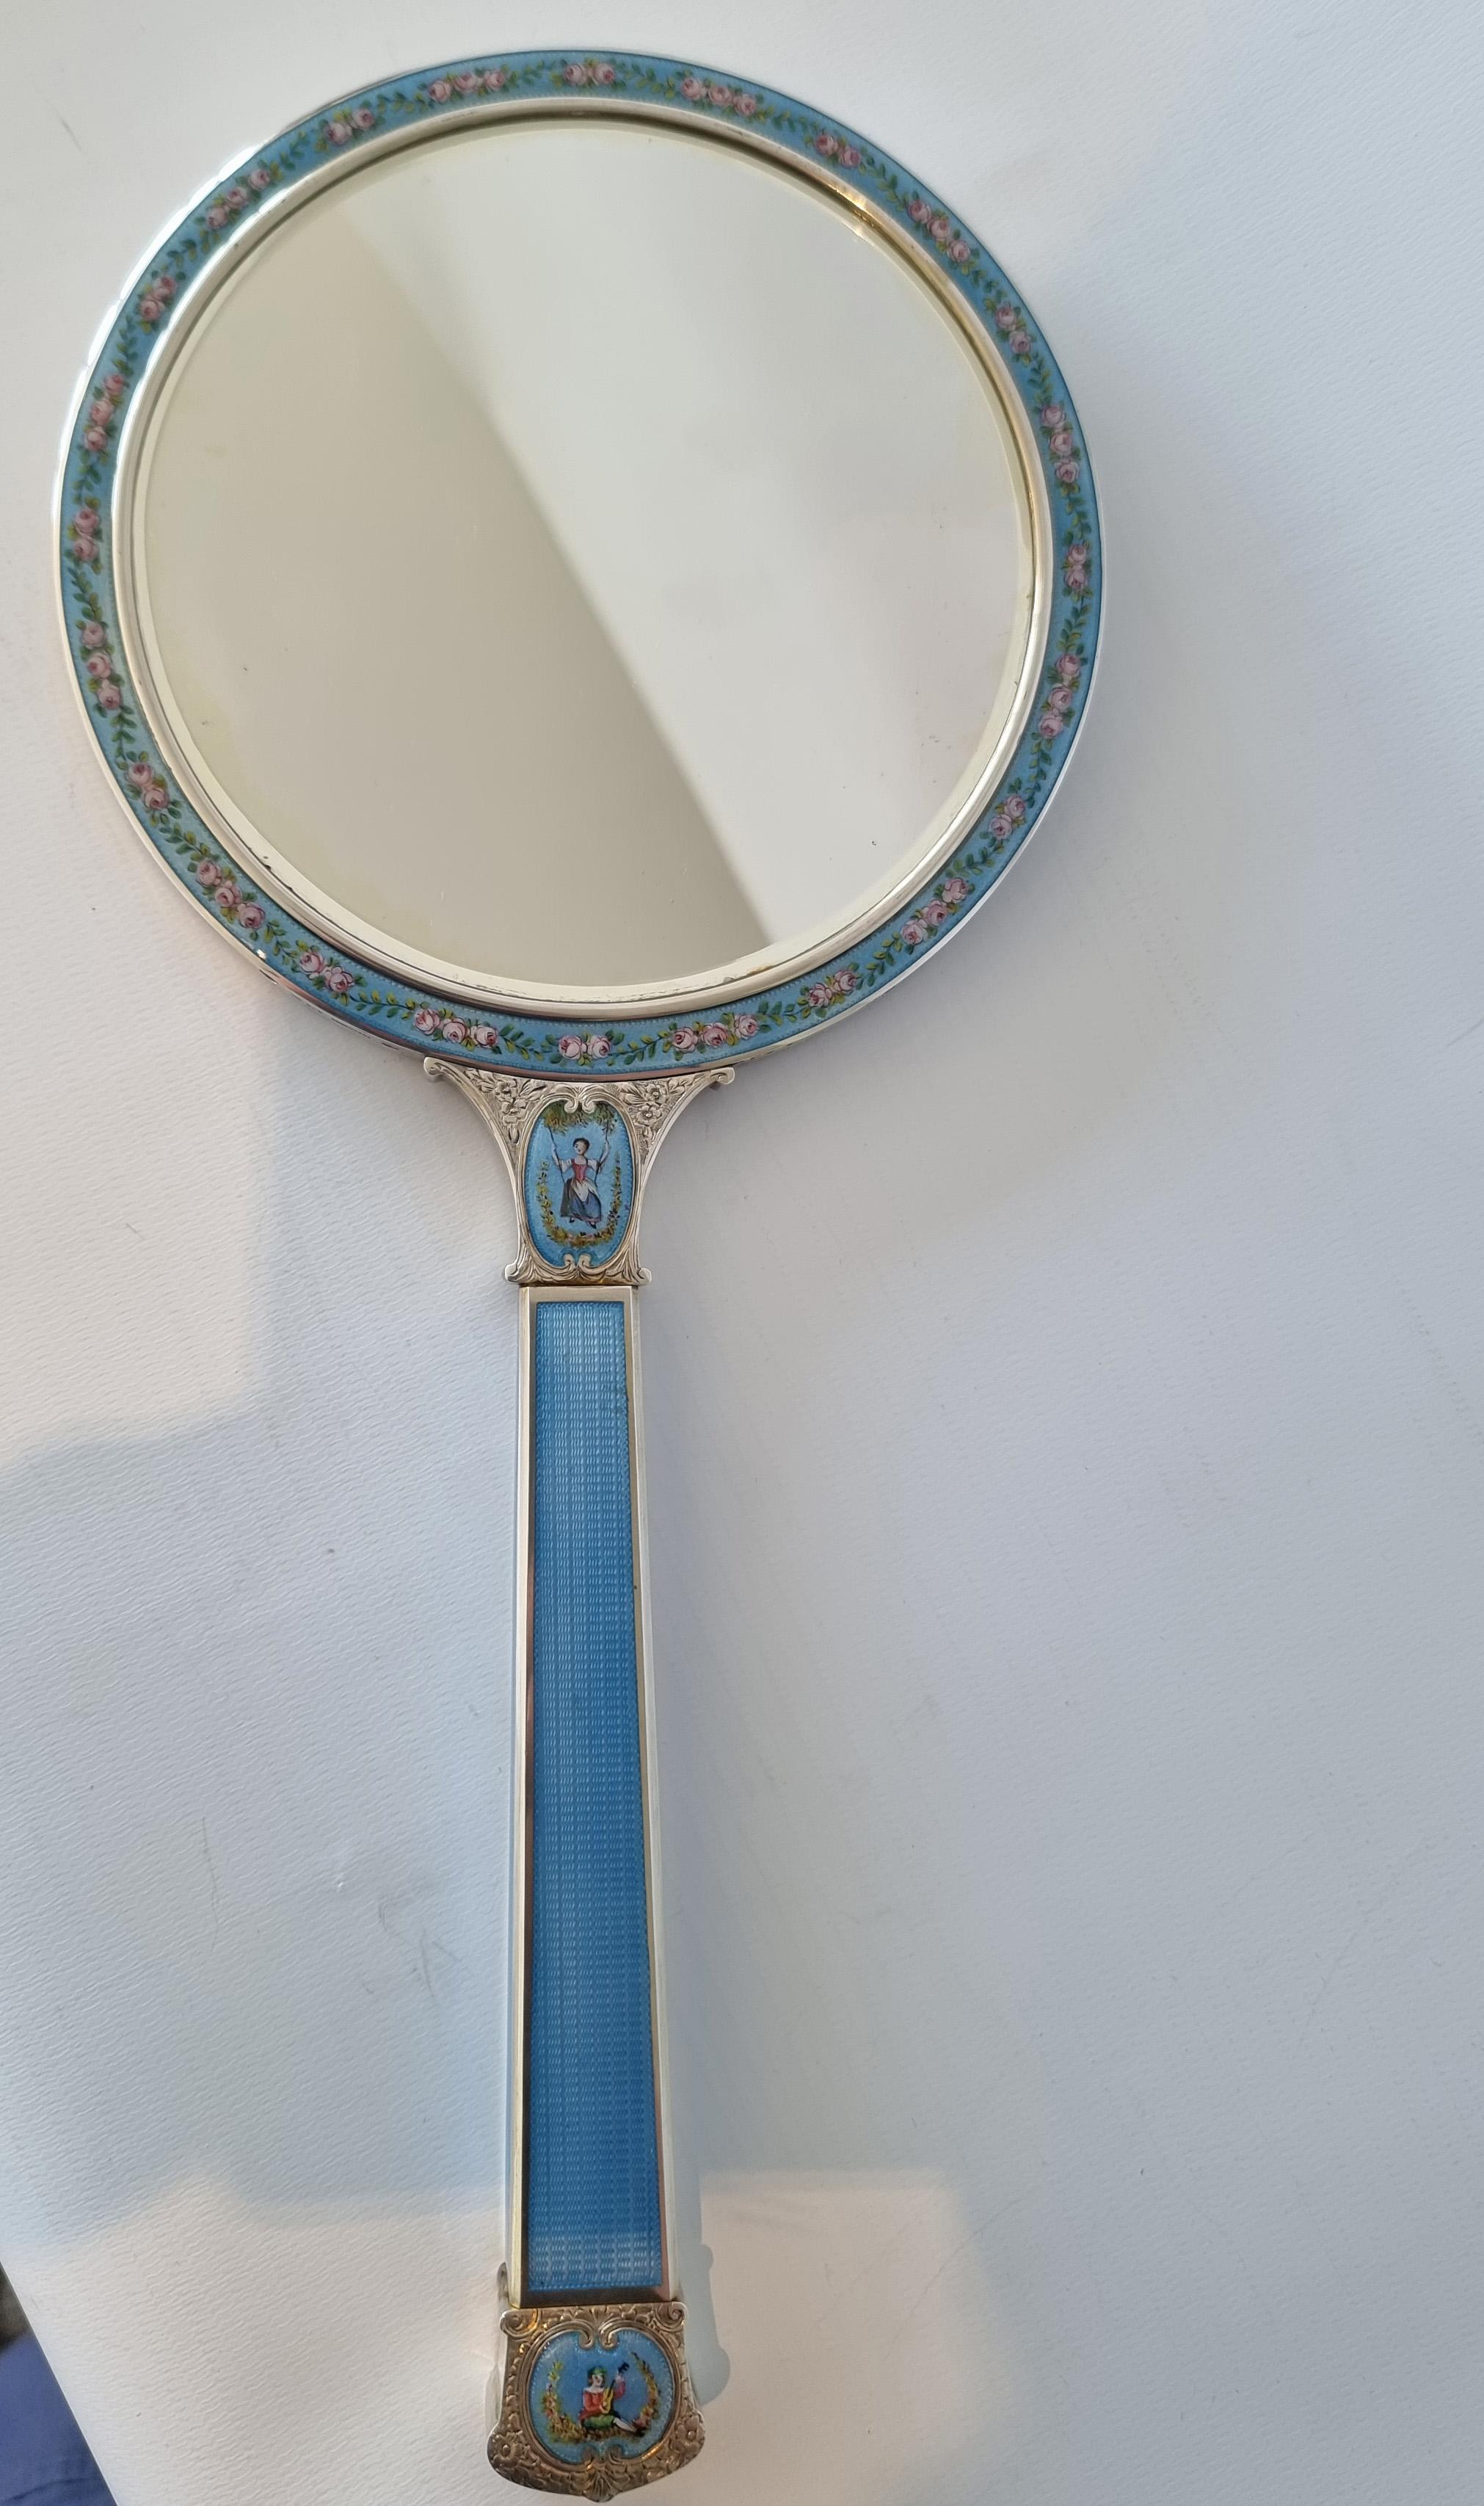 Early 20th Century Silver, Guilloche Enamel, Hand Painted Enamel and Watercolor Hand Mirror